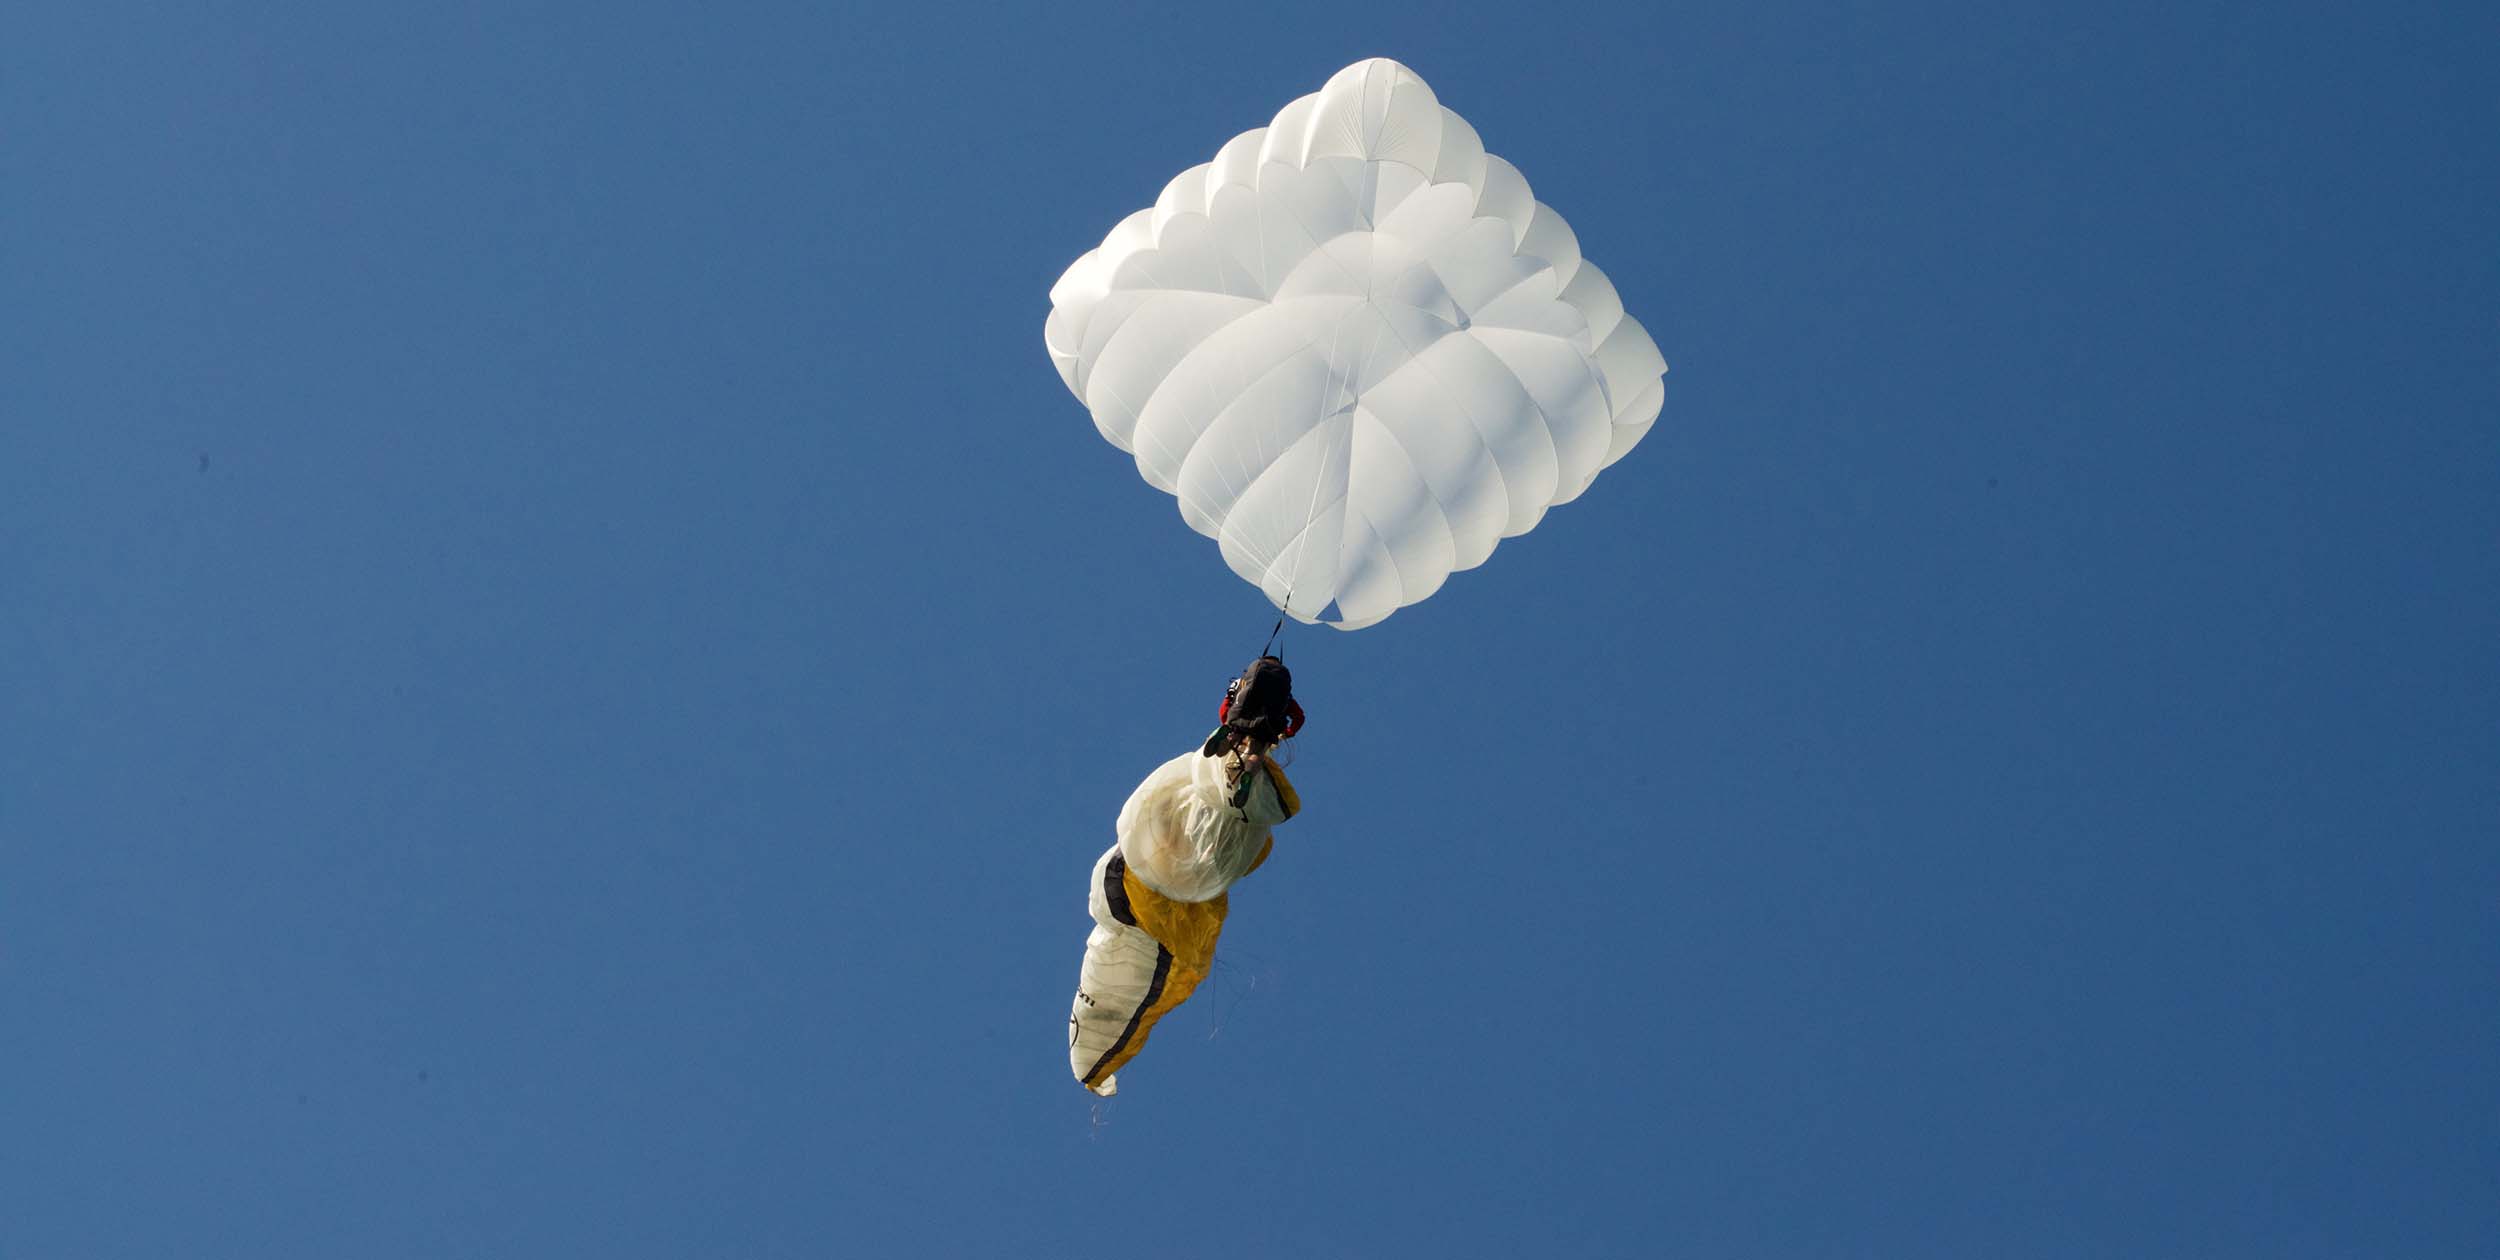 An Angel Square reserve parachute. Photo: Ozone